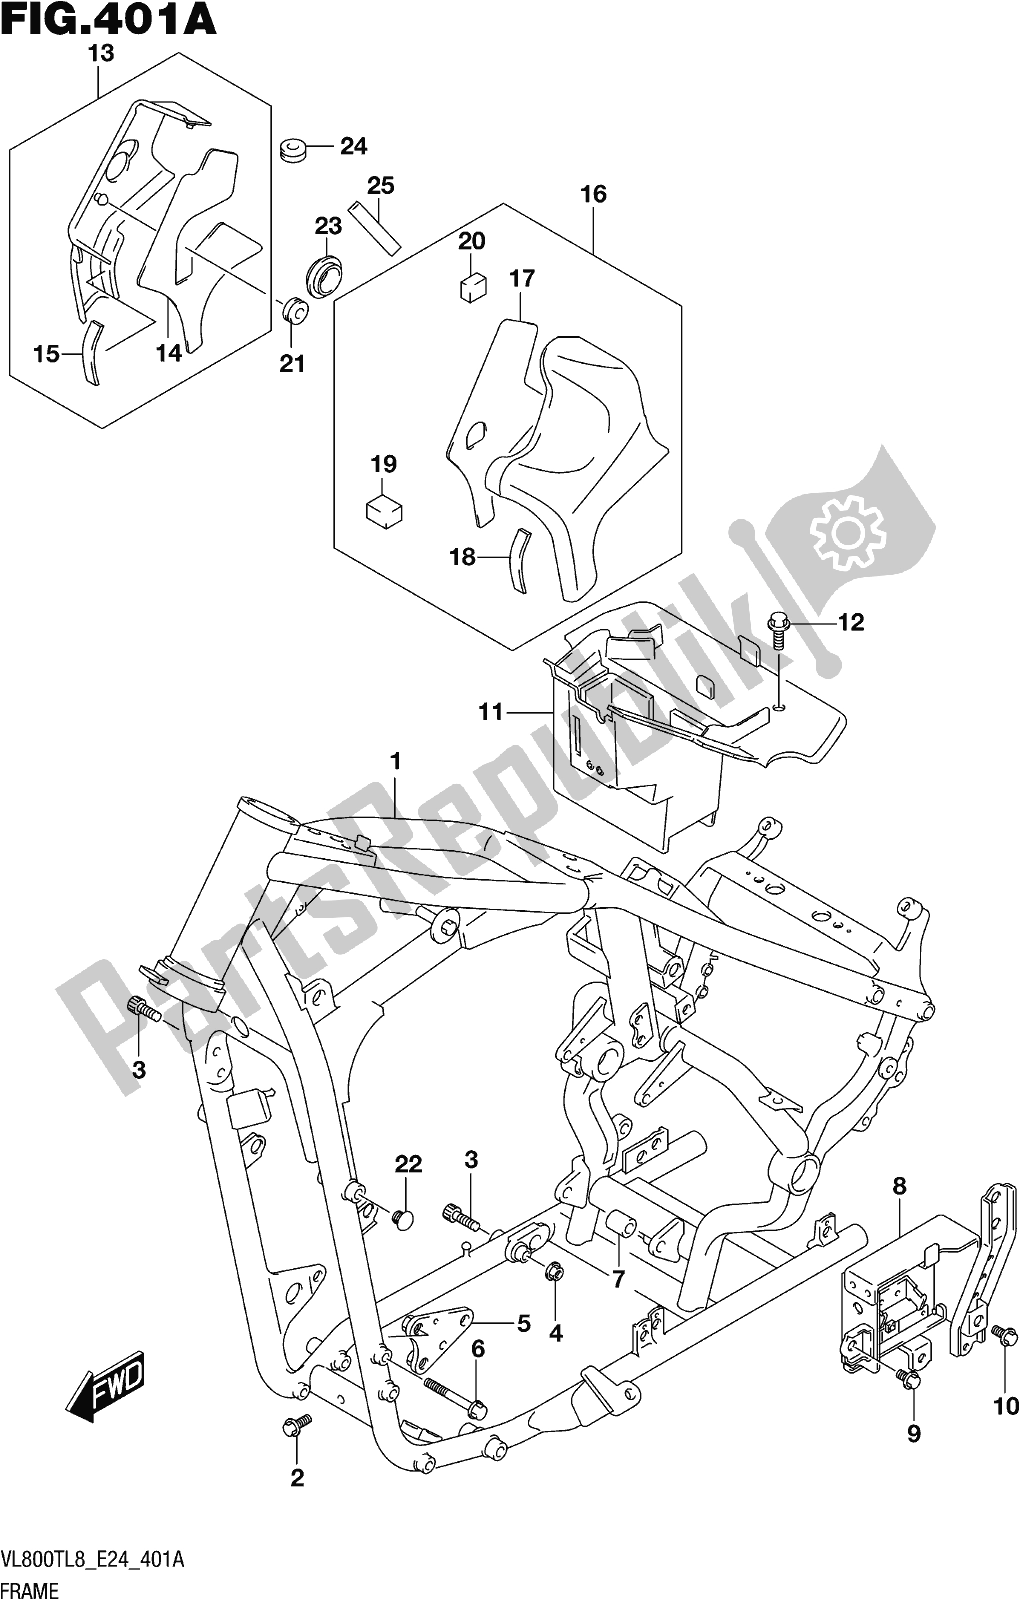 All parts for the Fig. 401a Frame of the Suzuki VL 800T 2018